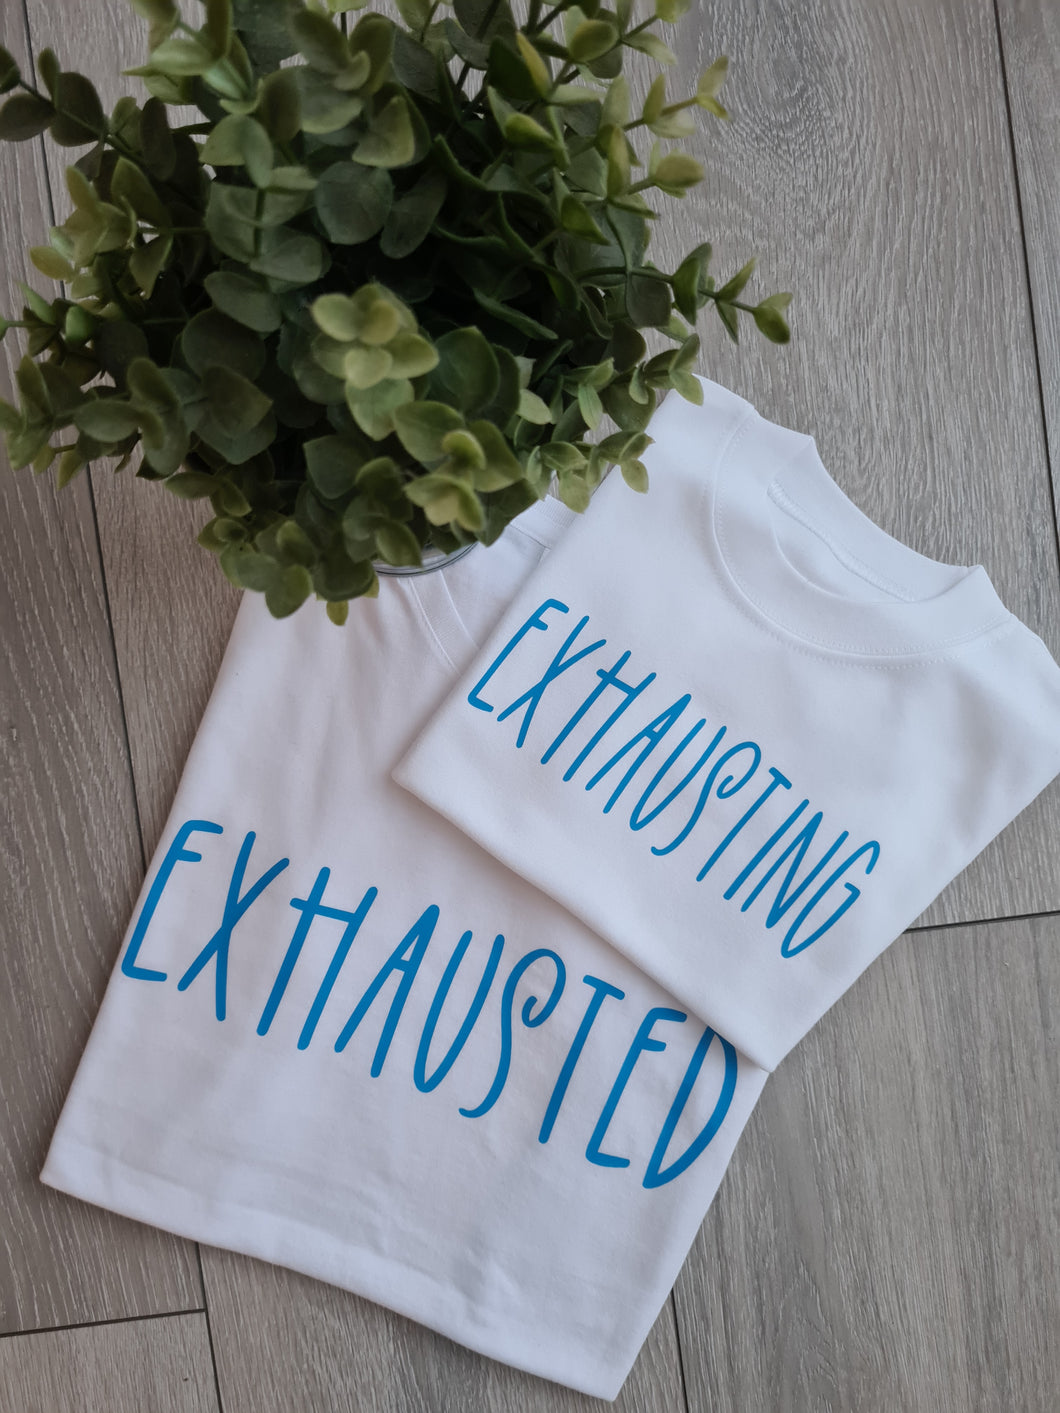 Exhausted/Exhausting Twinning T-shirt Set